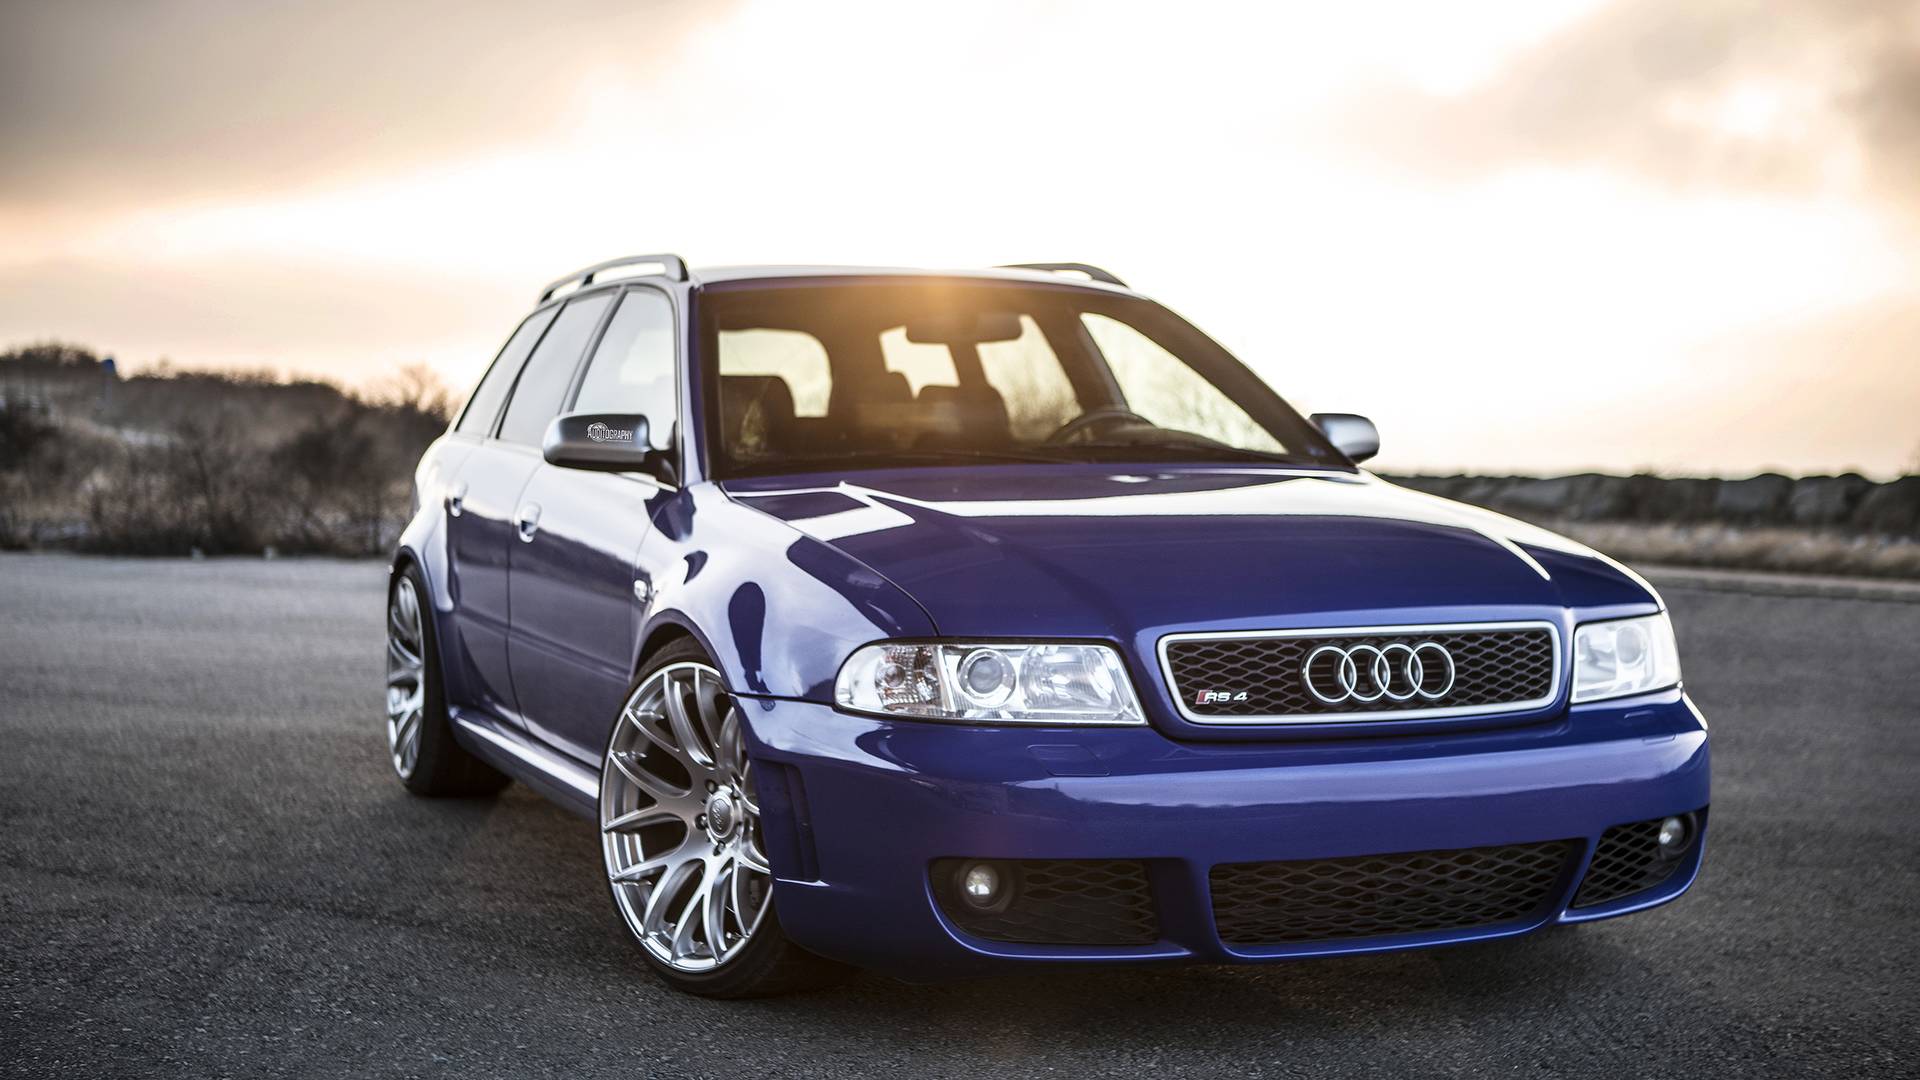 Past Meets Present: 2001 Audi RS4 Avant Joined By 2018 Model